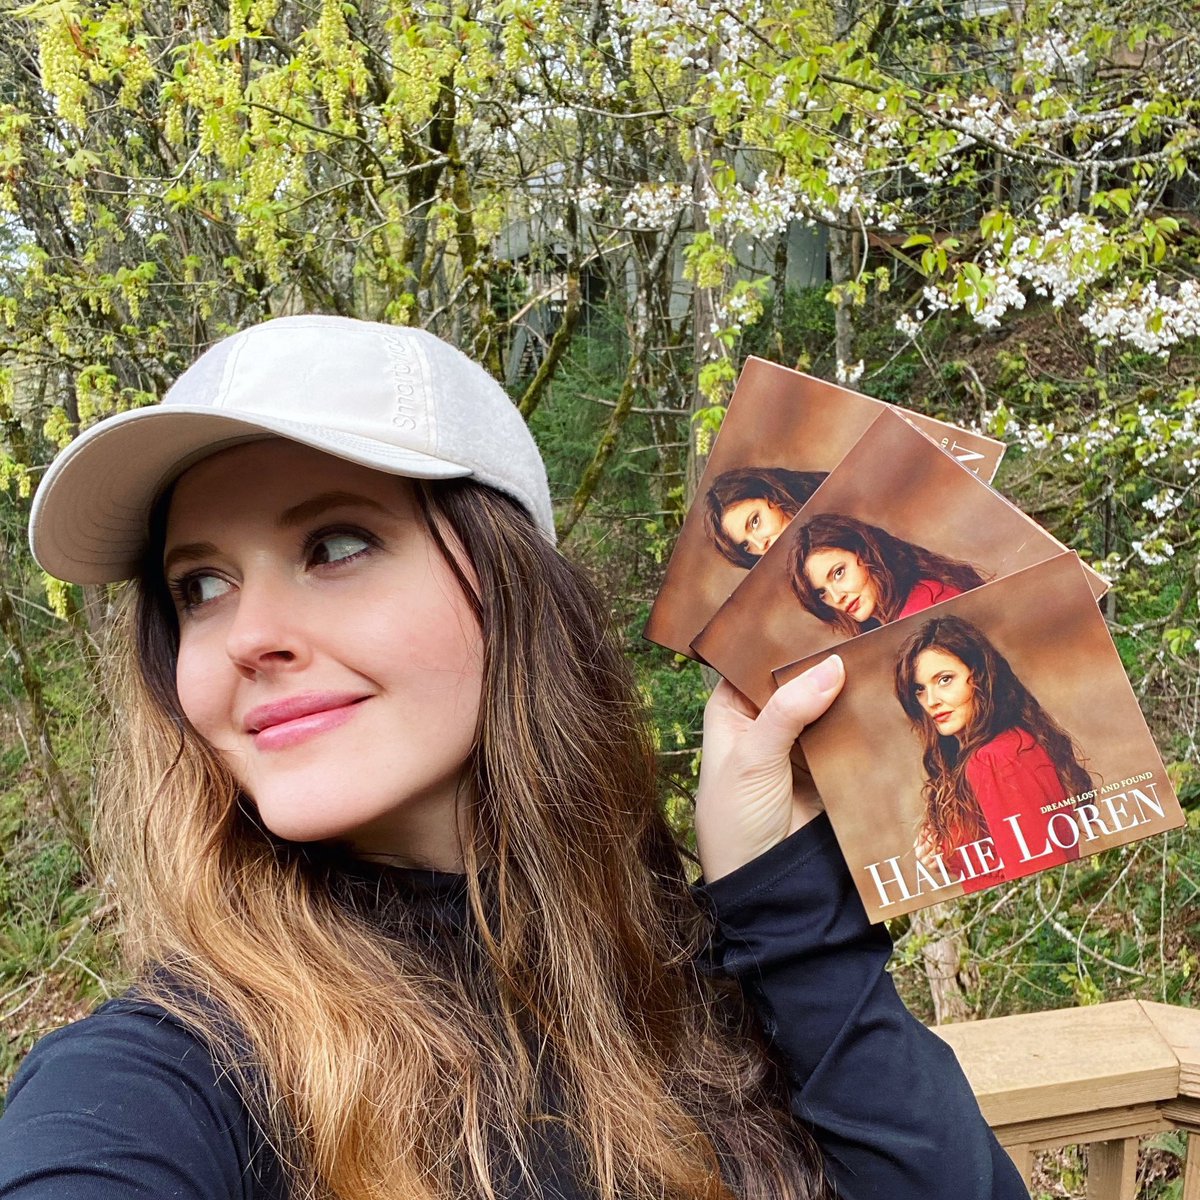 RELEASE DAY!!! 🎉🎉🎉 'Dreams Lost and Found' is OUT NOW! So excited for you to hear this album!!! Stream it on all platforms & download it (or buy a CD!) from my Bandcamp store or music retailer of choice. This music is YOURS now, my friends! ❤️ #dreamslostandfound #NewAlbum